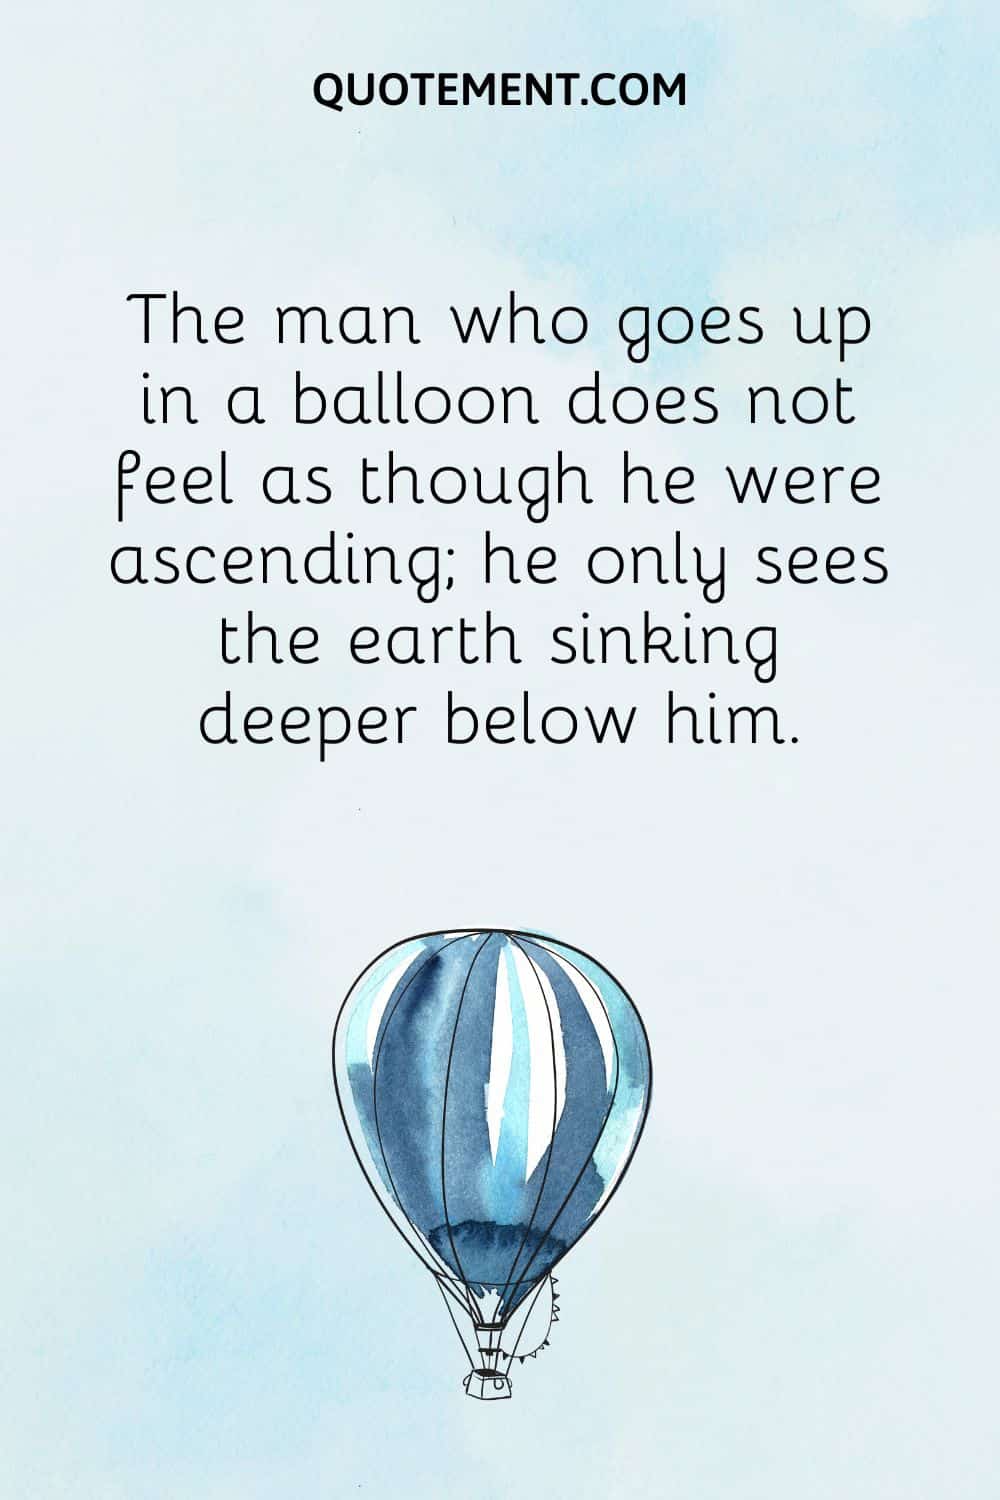 The man who goes up in a balloon does not feel as though he were ascending; he only sees the earth sinking deeper below him